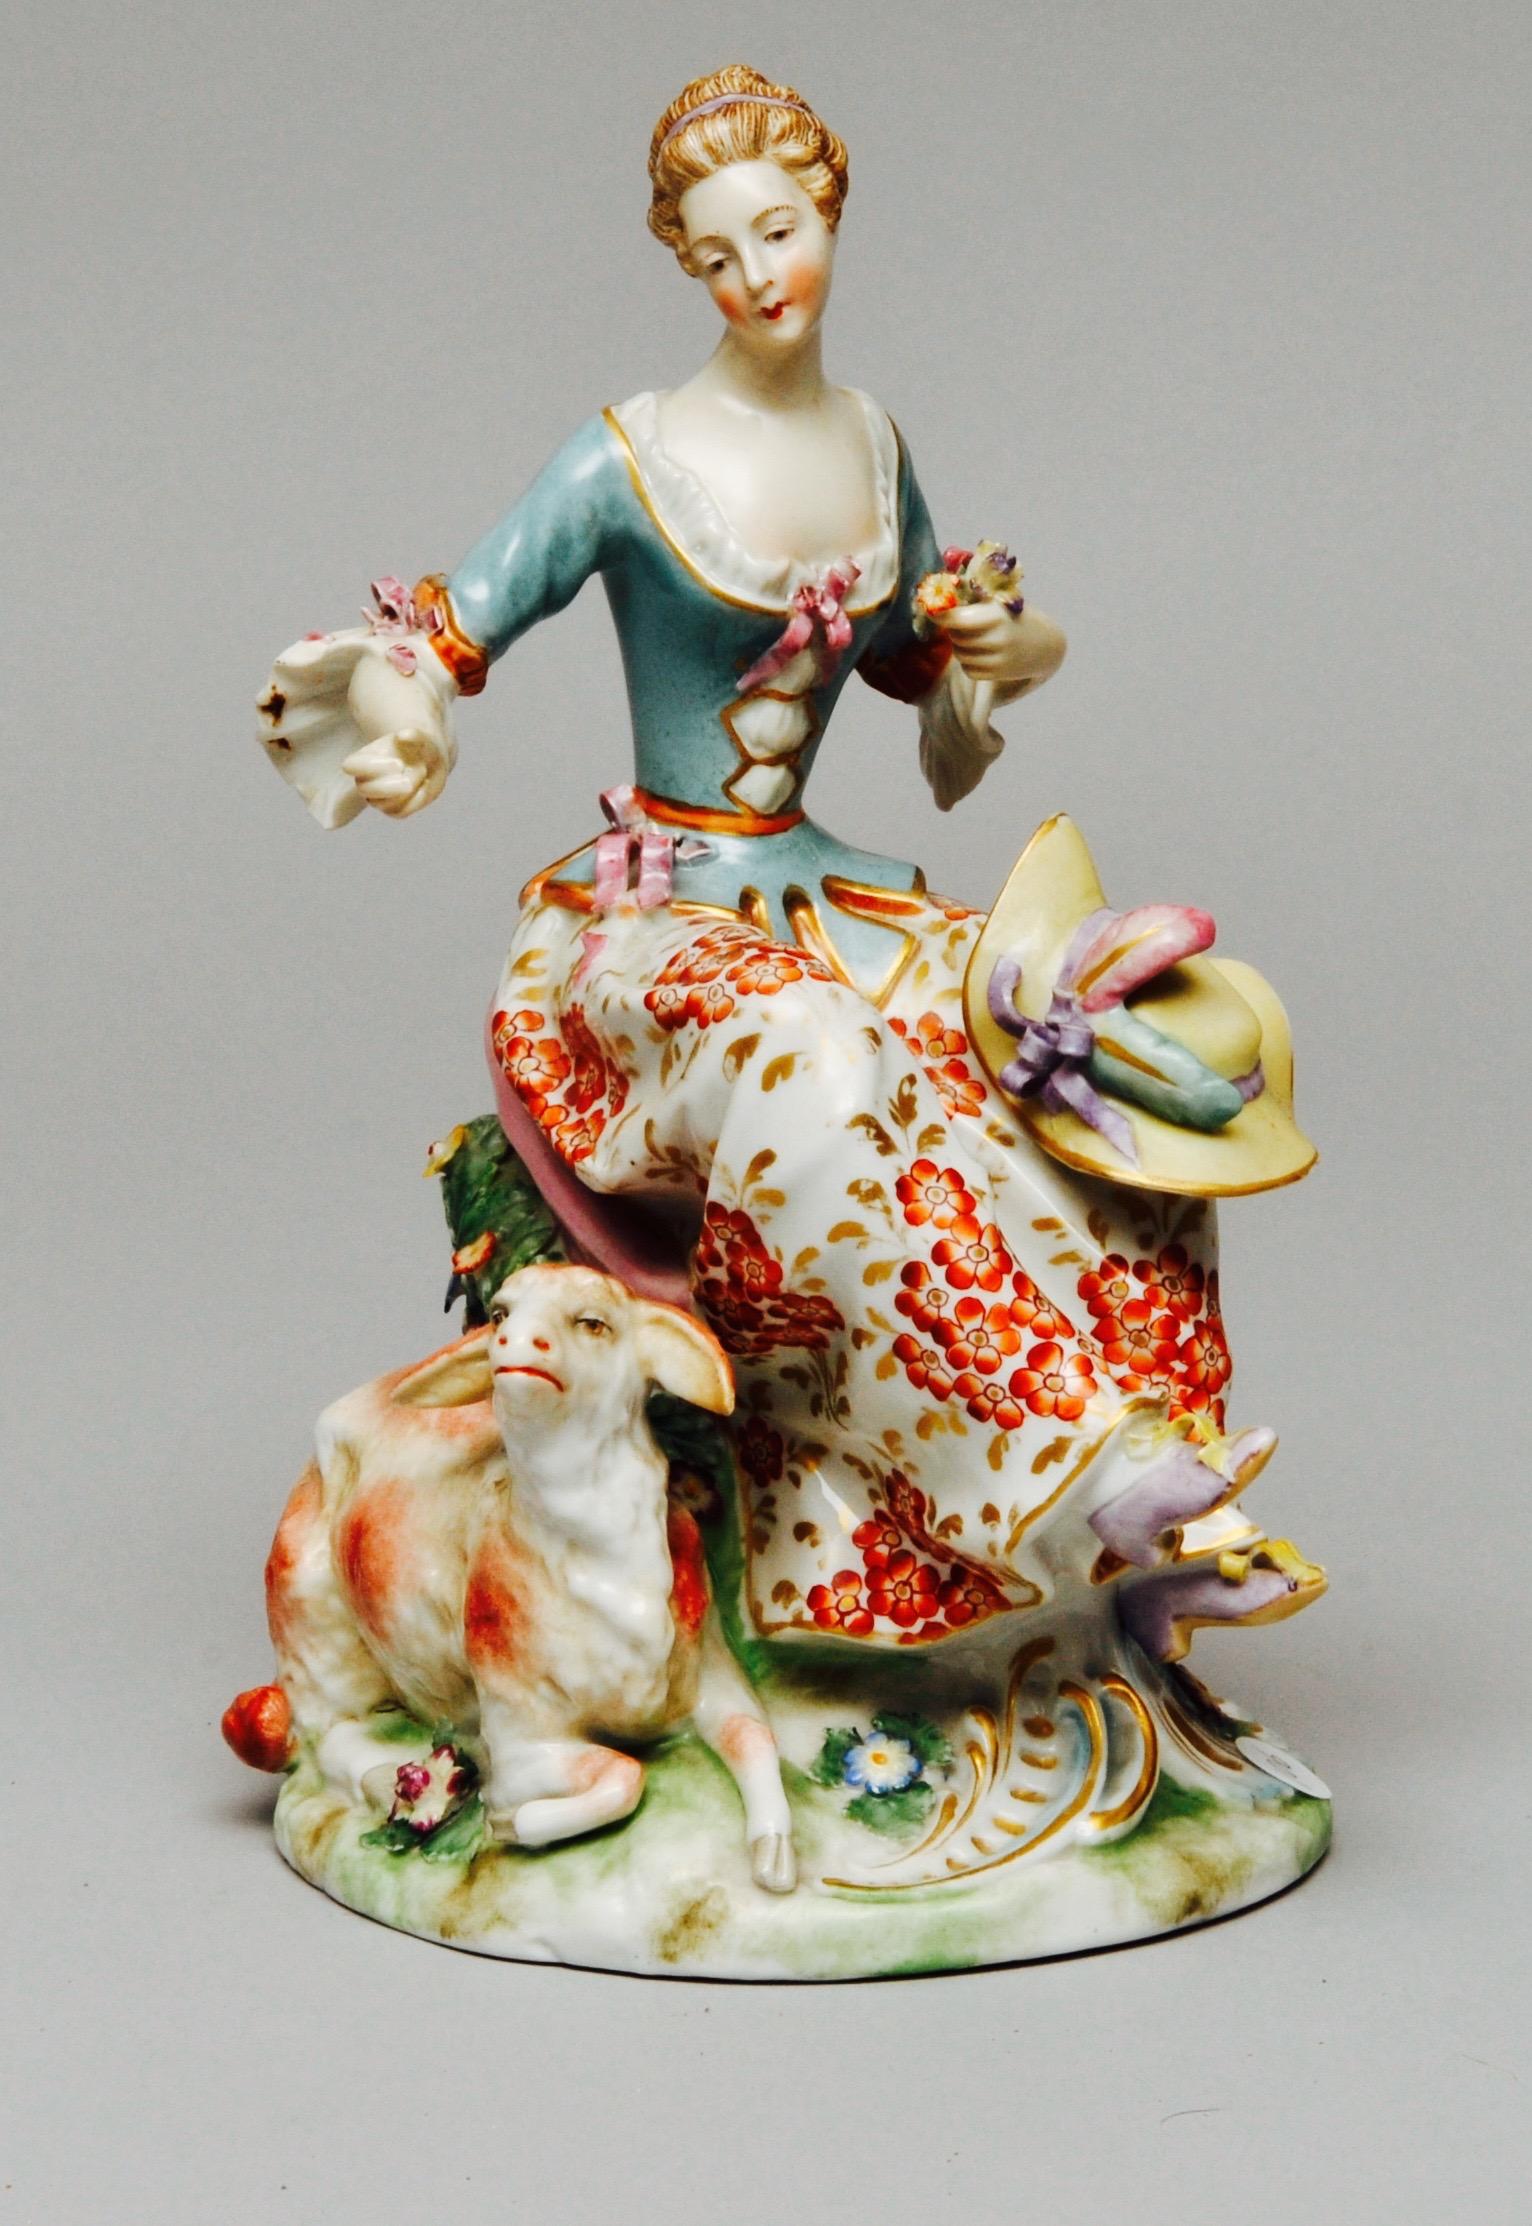 A beautiful pair of porcelain figurines - a shepherd and a shepherdess, with stunning detail and color.

Measure: 22cm height approximate.